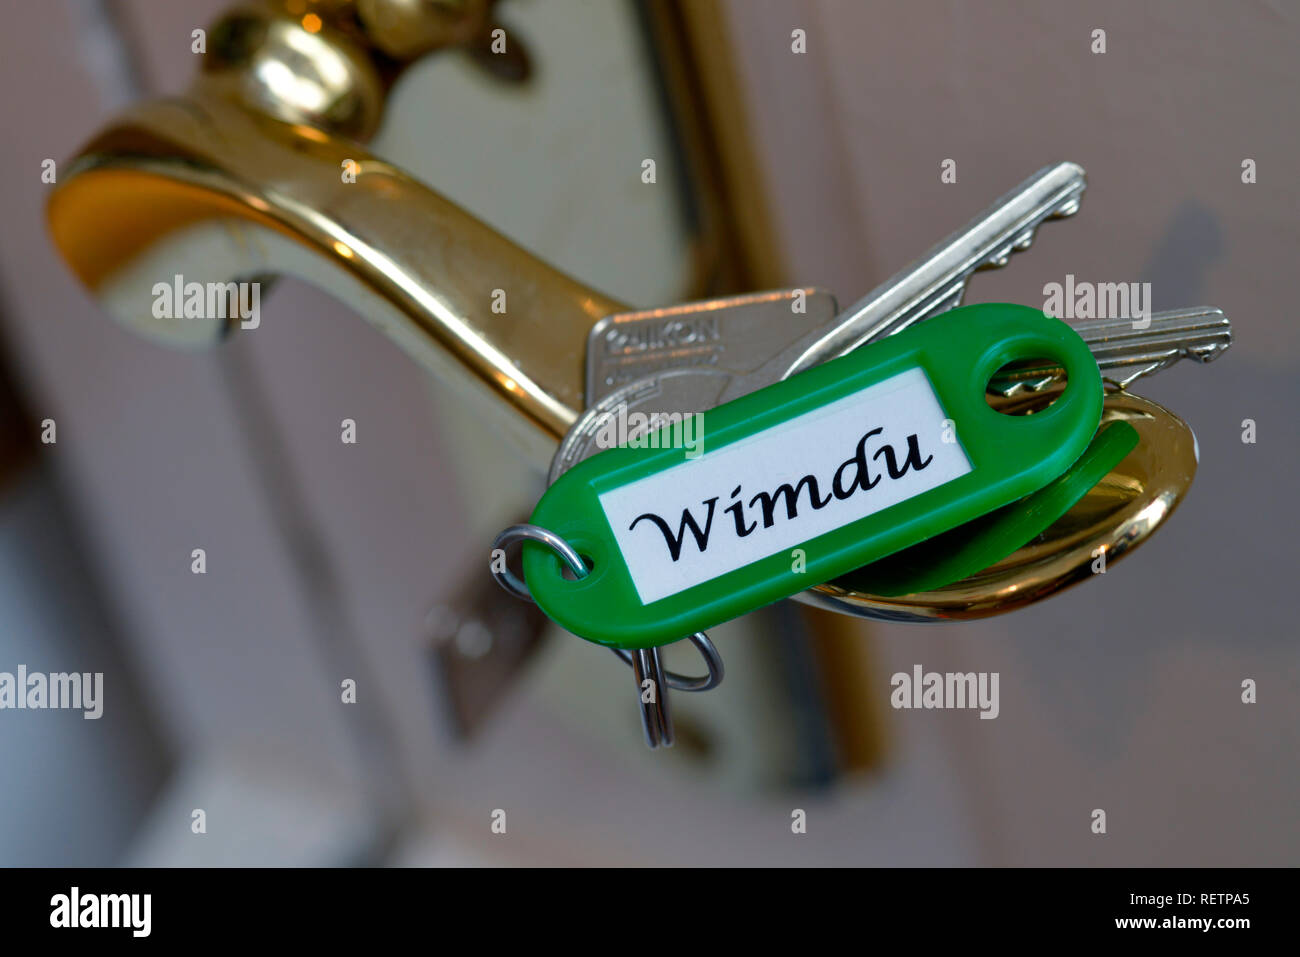 keys for holiday apartment, Wimdu Stock Photo